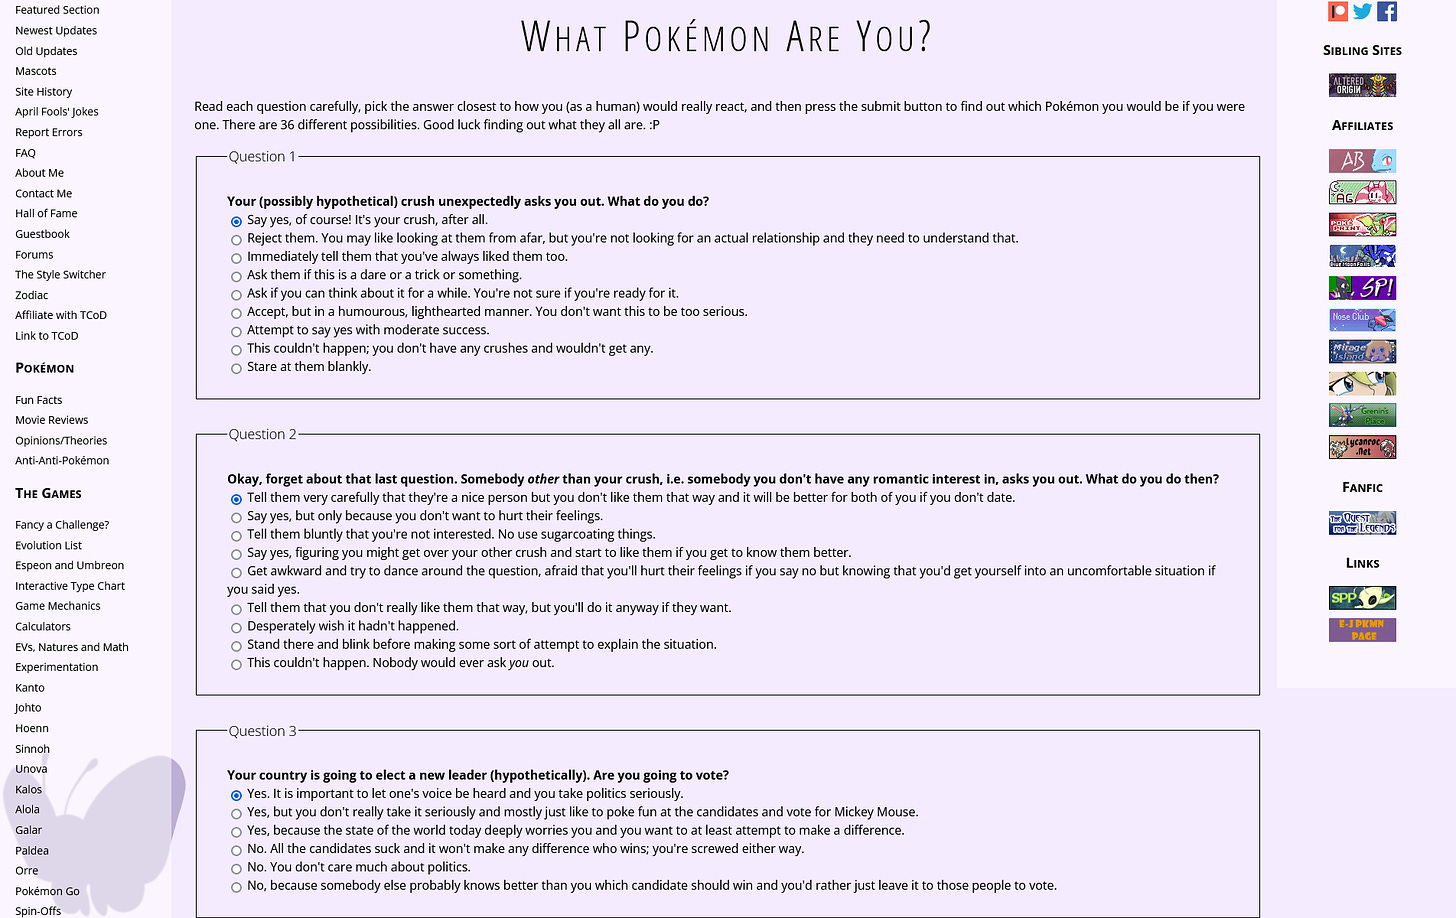 What Pokémon are YOU? You can find out if you visit The Cave of Dragonflies and take the quiz